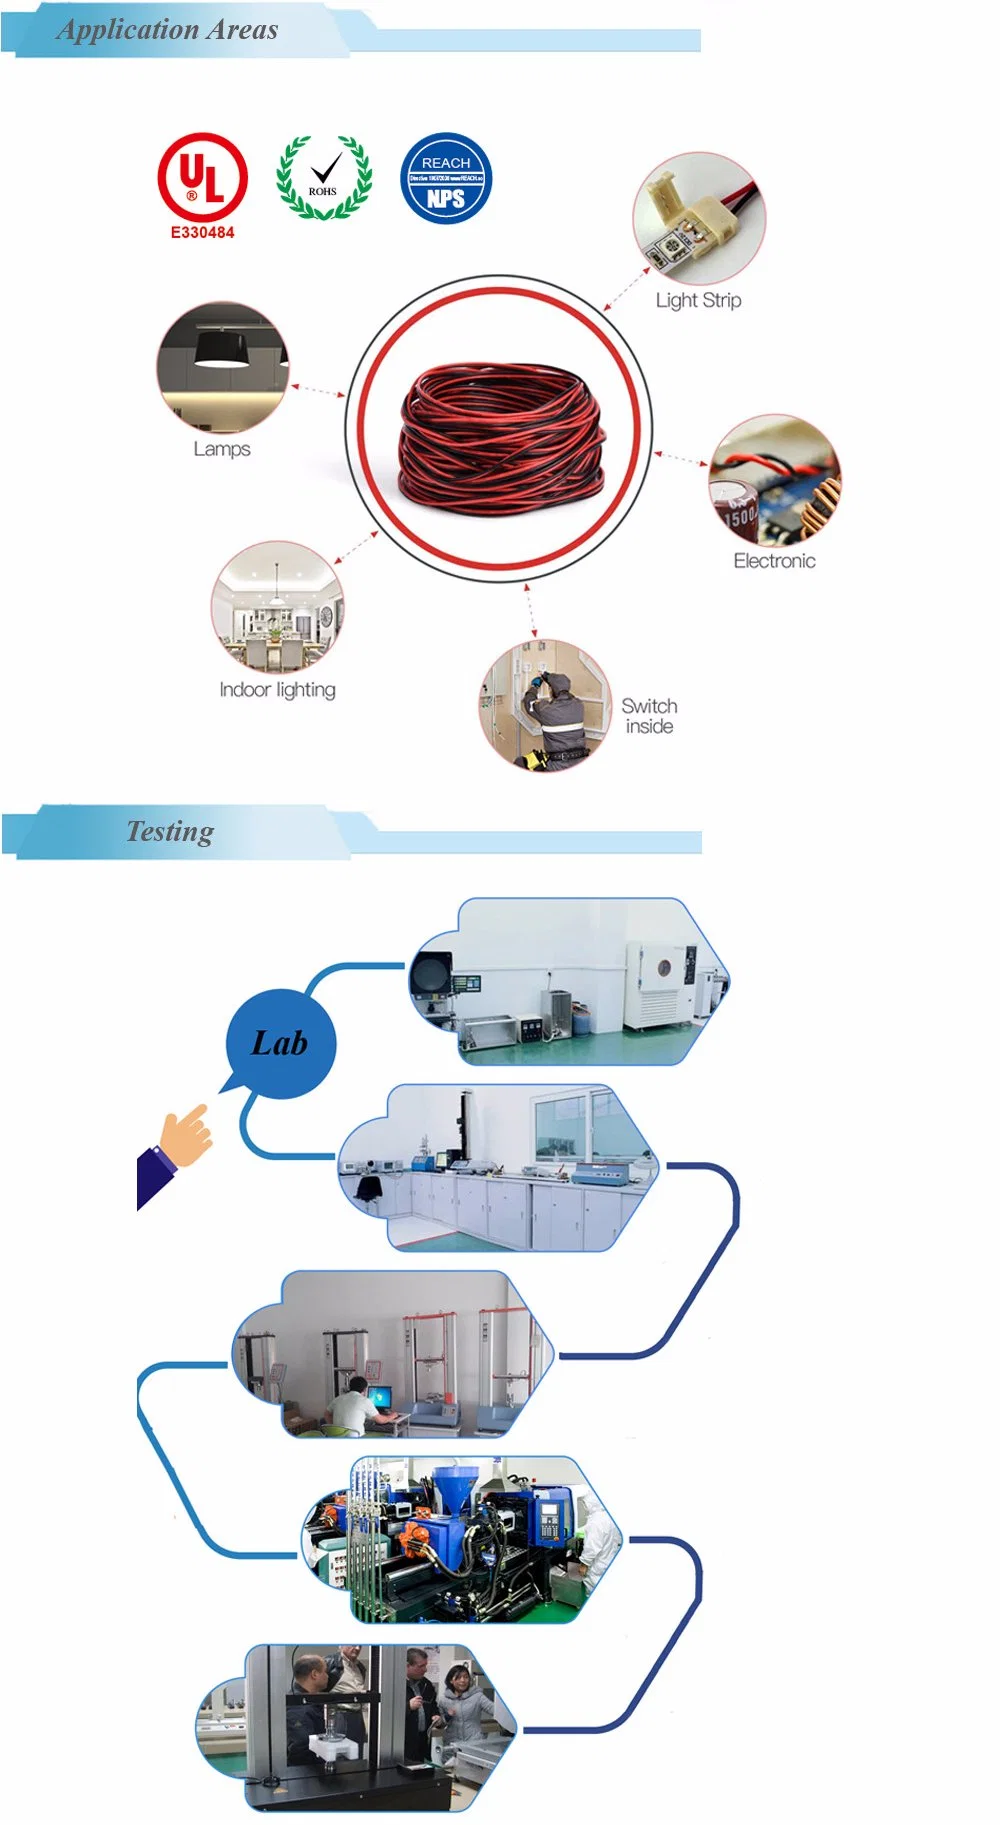 Wholesale Oxygen Free Copper Flexible Wire UL3321 Halogen Free Flame Retardant and Fire-Resistant Irradiation Electric Wires and Cable